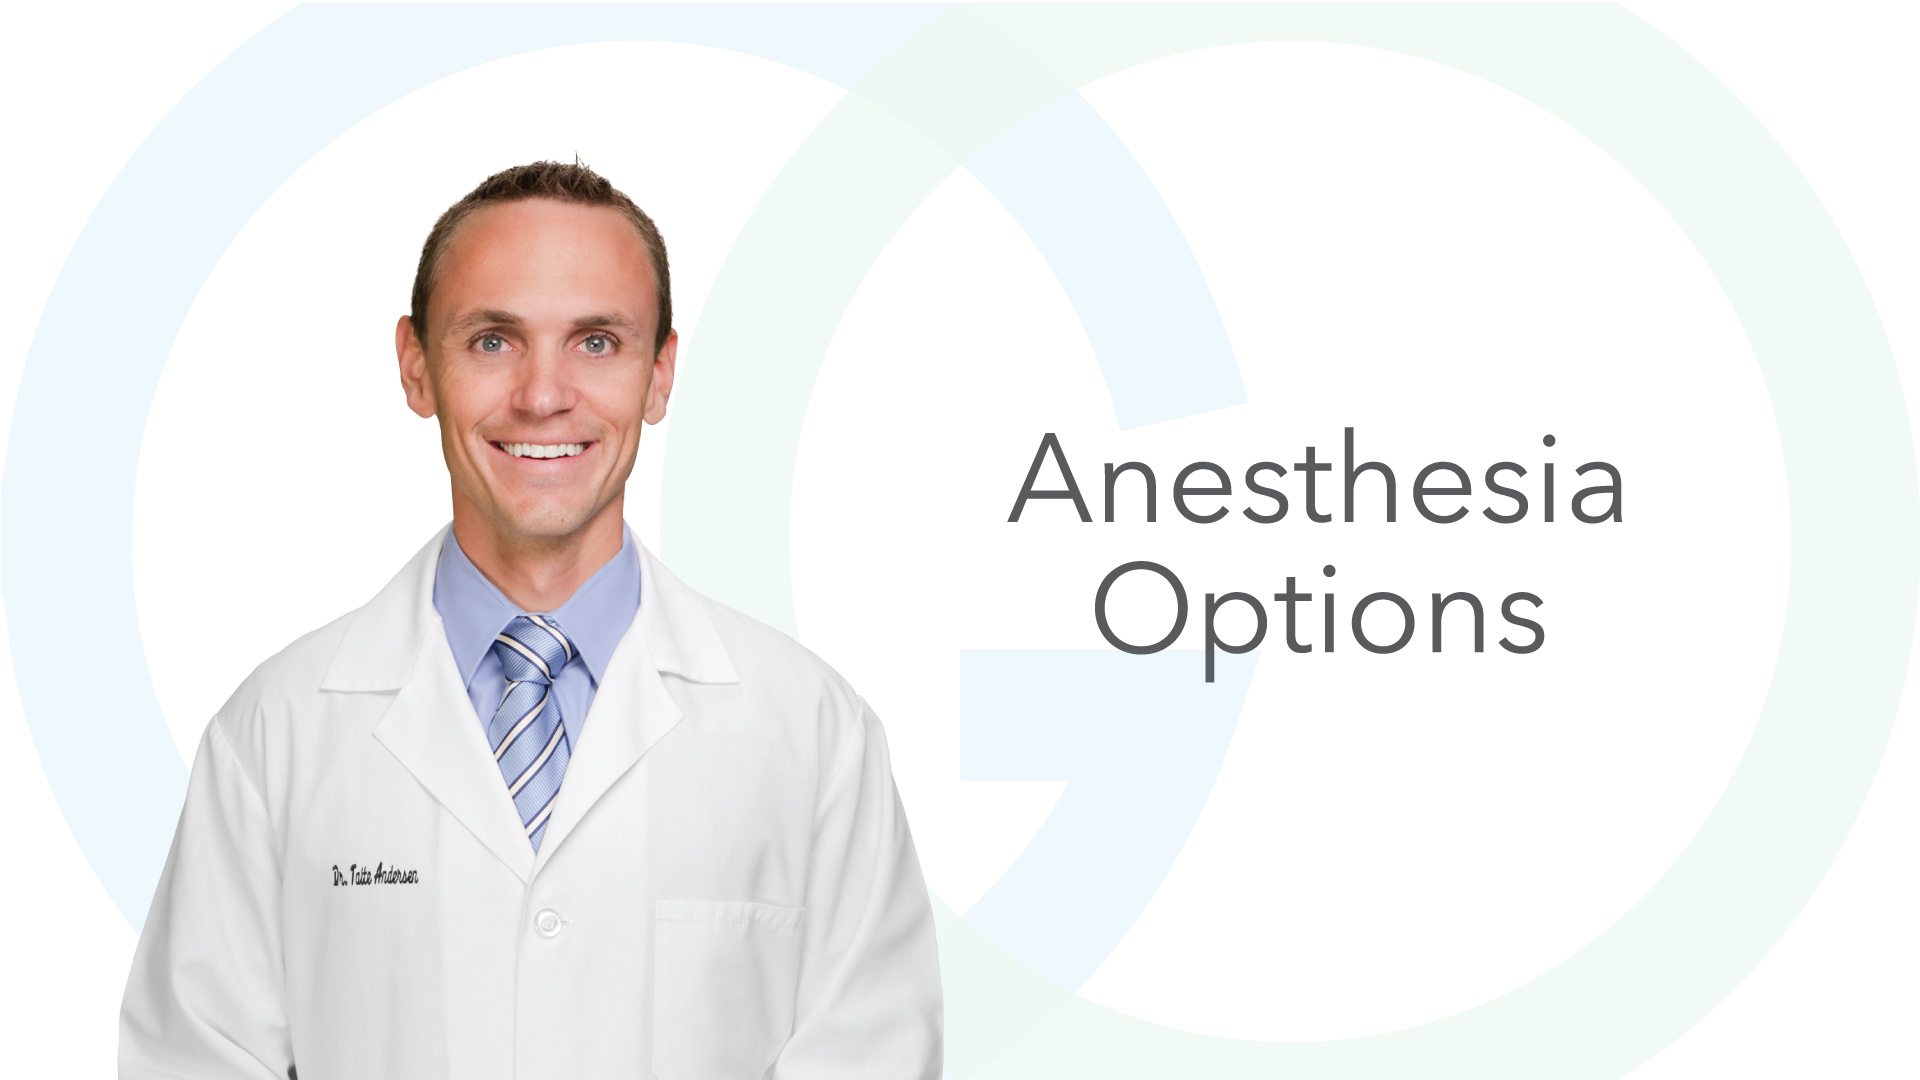 Anesthesia Options at Granger Oral Surgery & Dental Implants